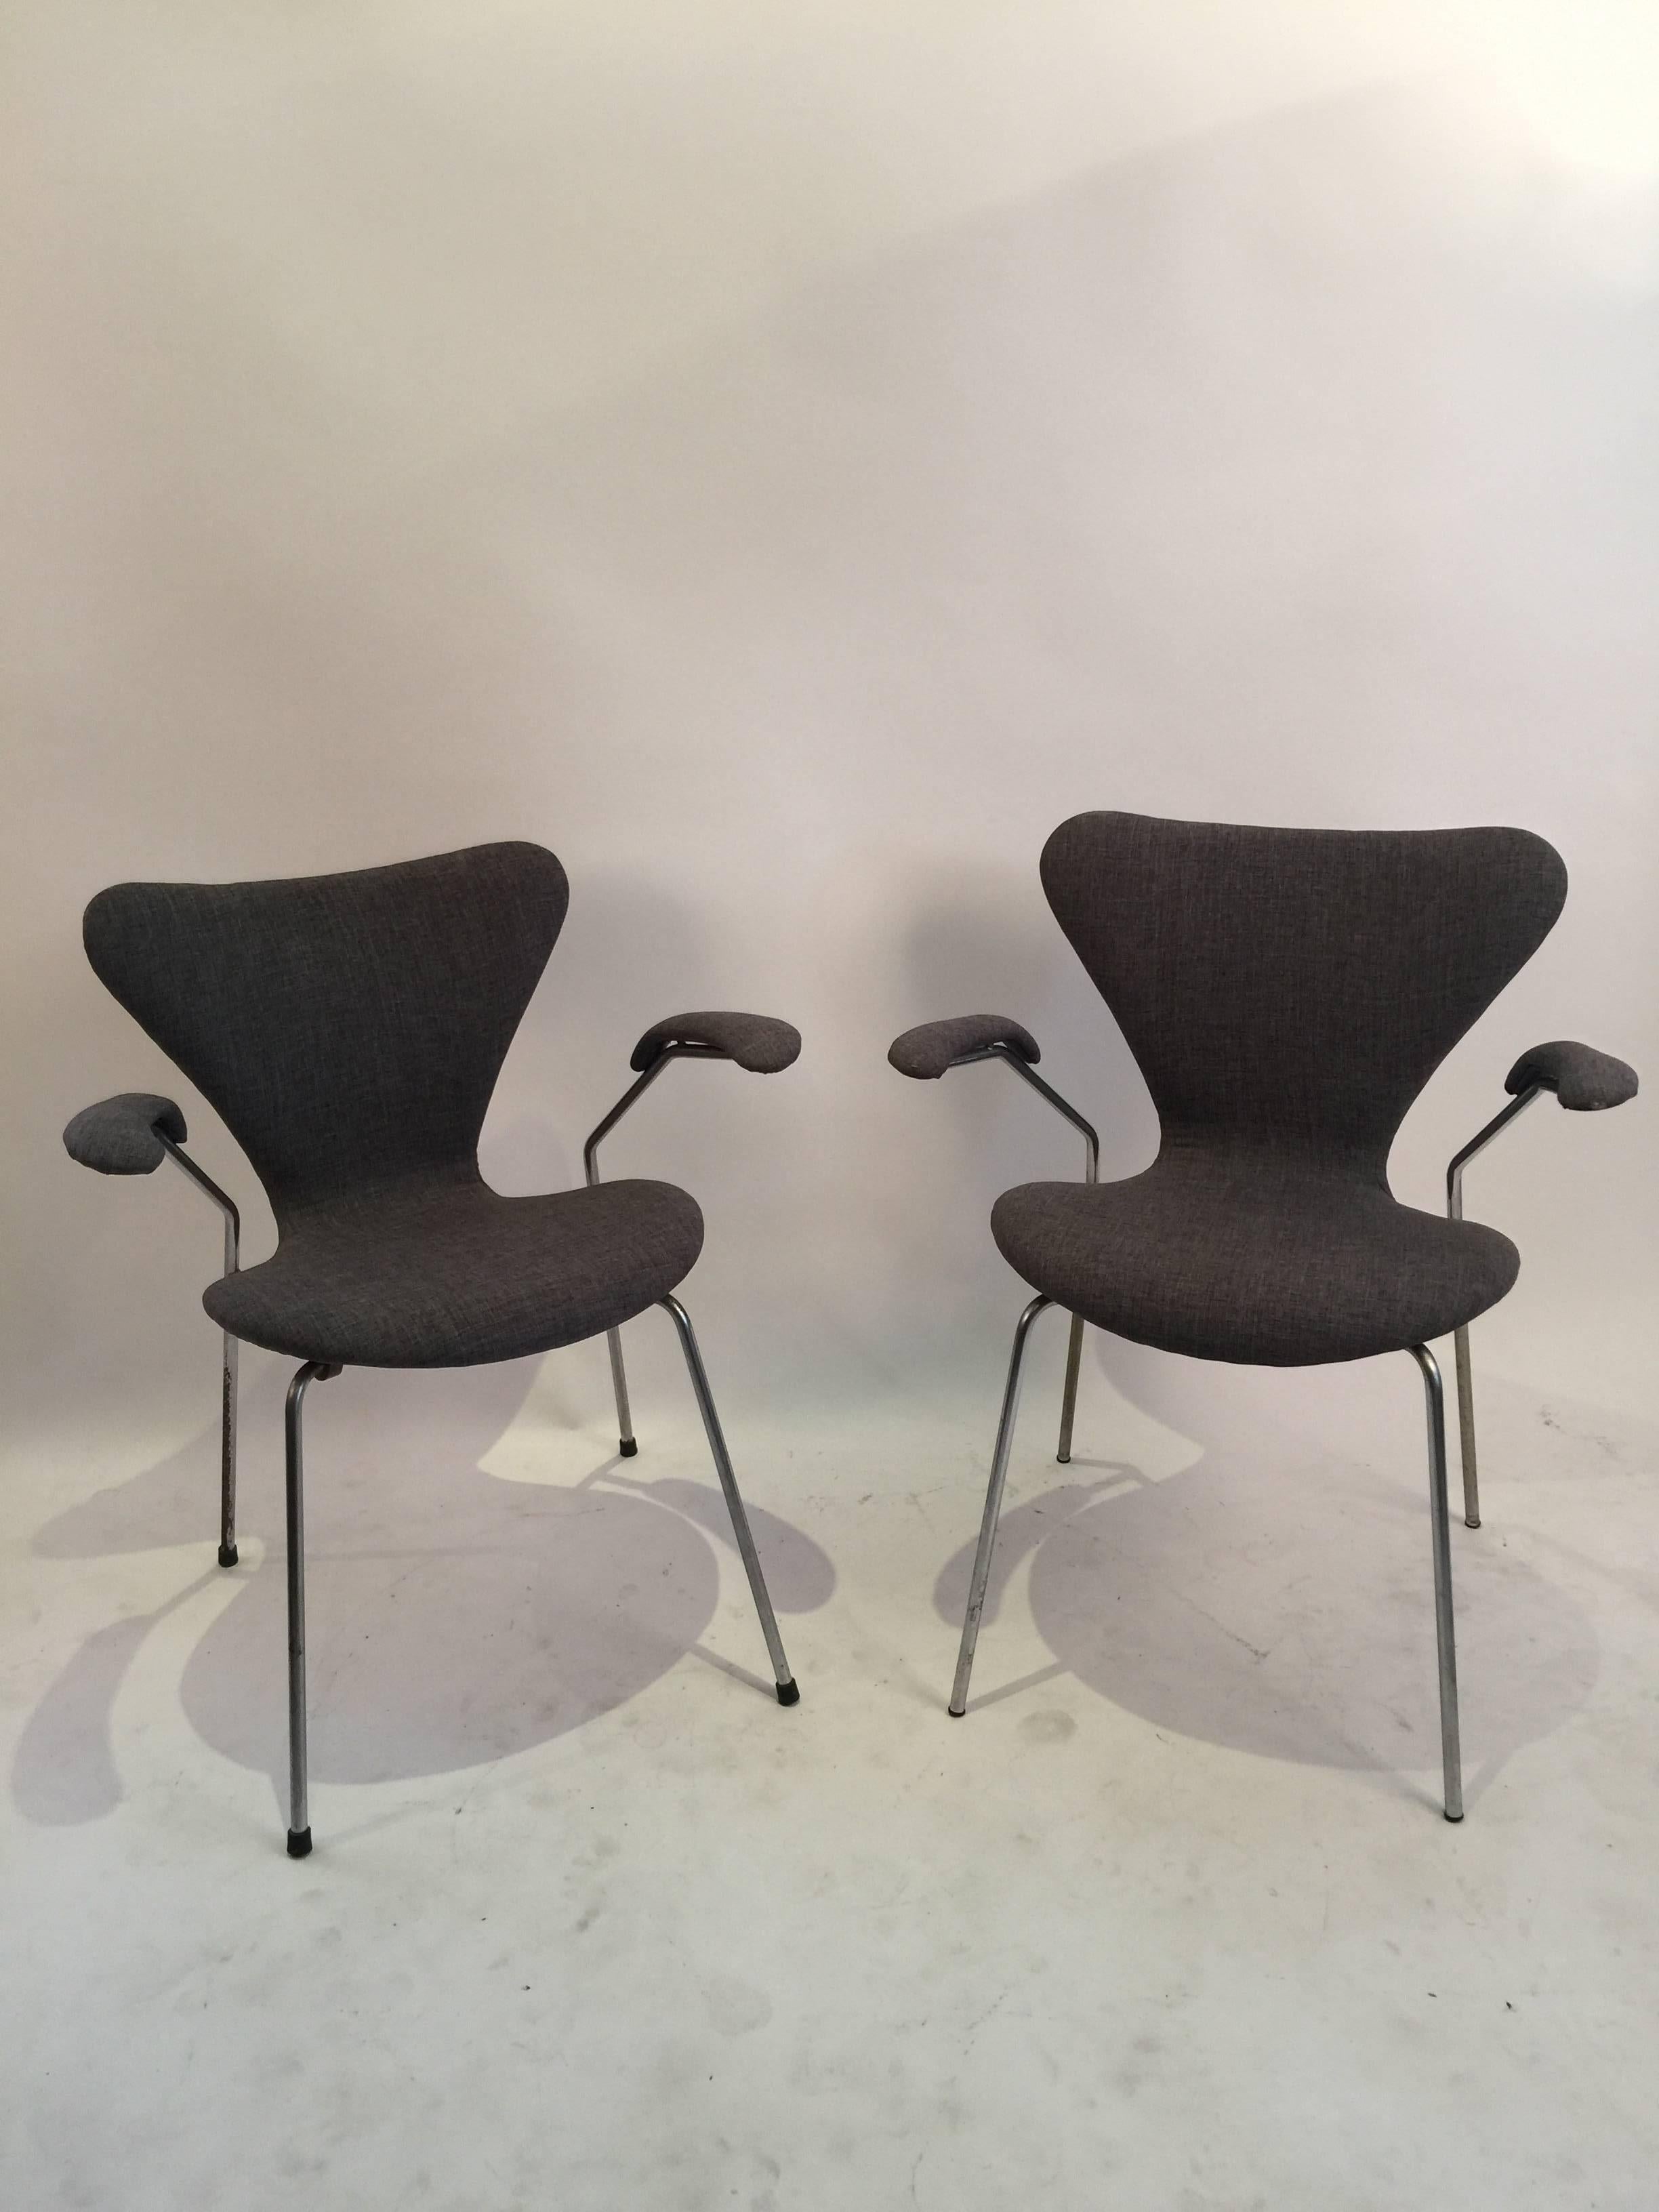 Pair of iconic Fritz Hansen Series 7 armchair designed by Arne Jacobsen in the 1970s. Padded arm version, recovered in the late 1980s by original owner in grey fabric. Built from bent plywood with tubular steel frame. 
 